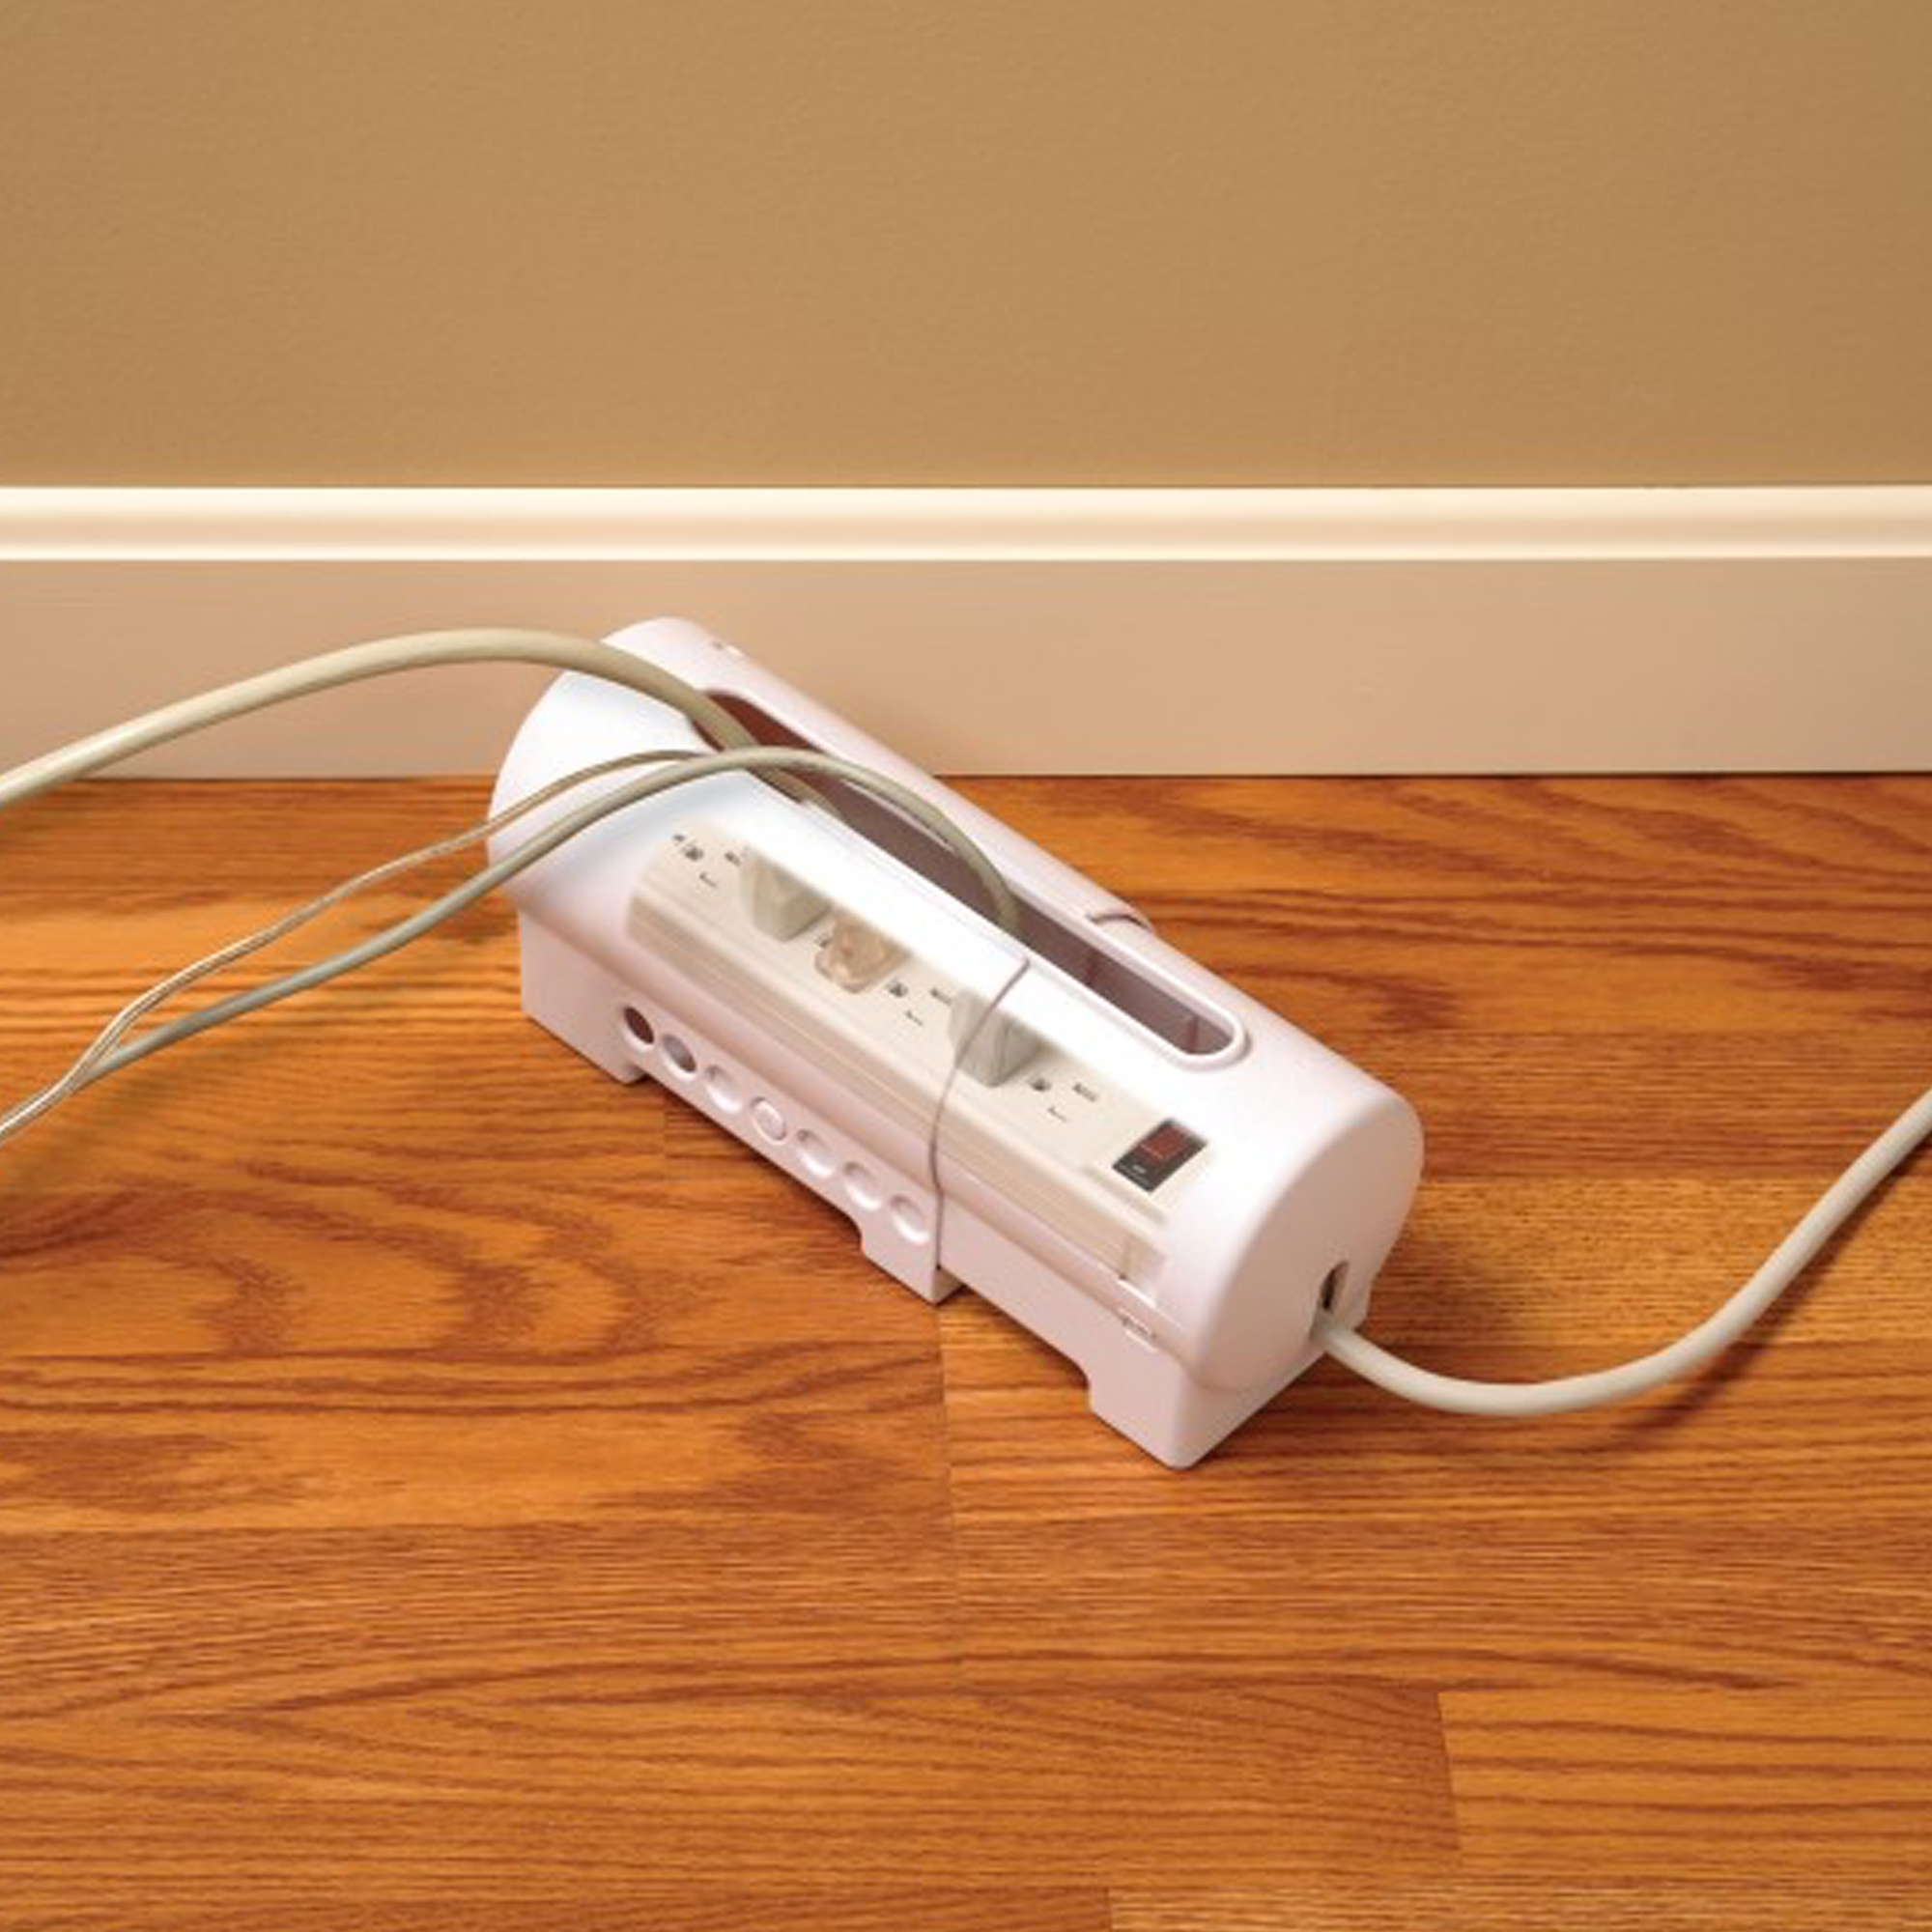 power strip cover installed with cords going through